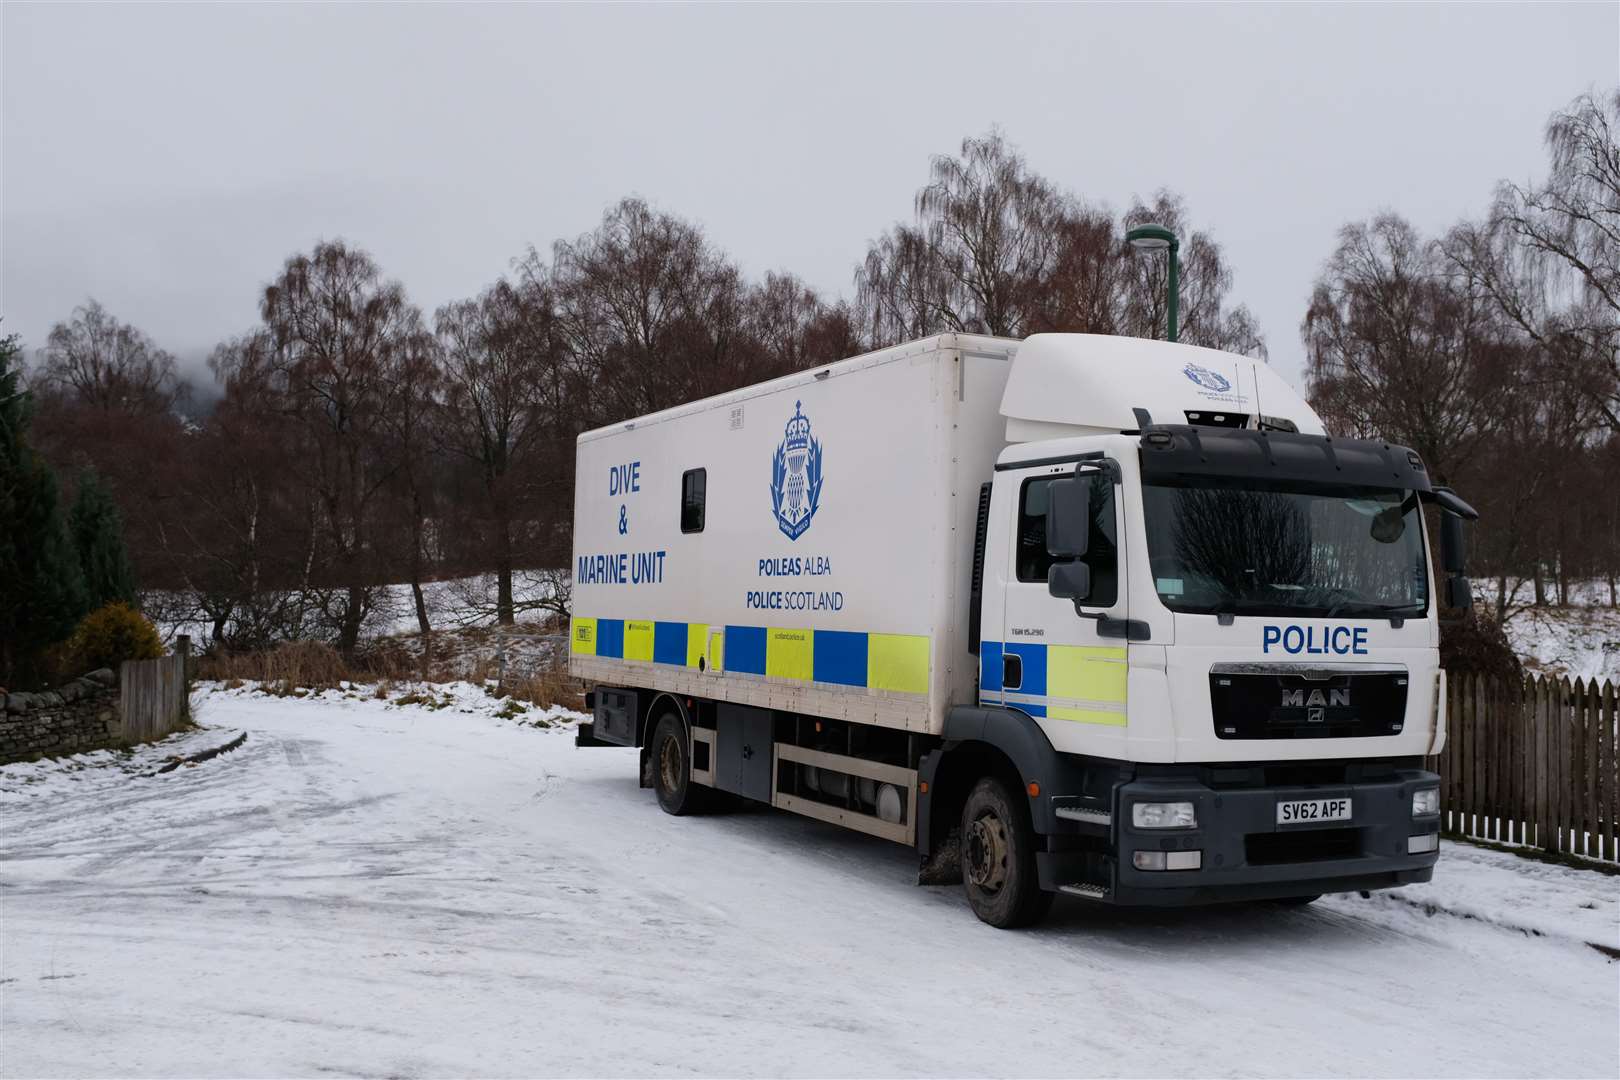 The police dive unit vehicle parked up at Dalfaber Park which is close to the River Spey in Aviemore.